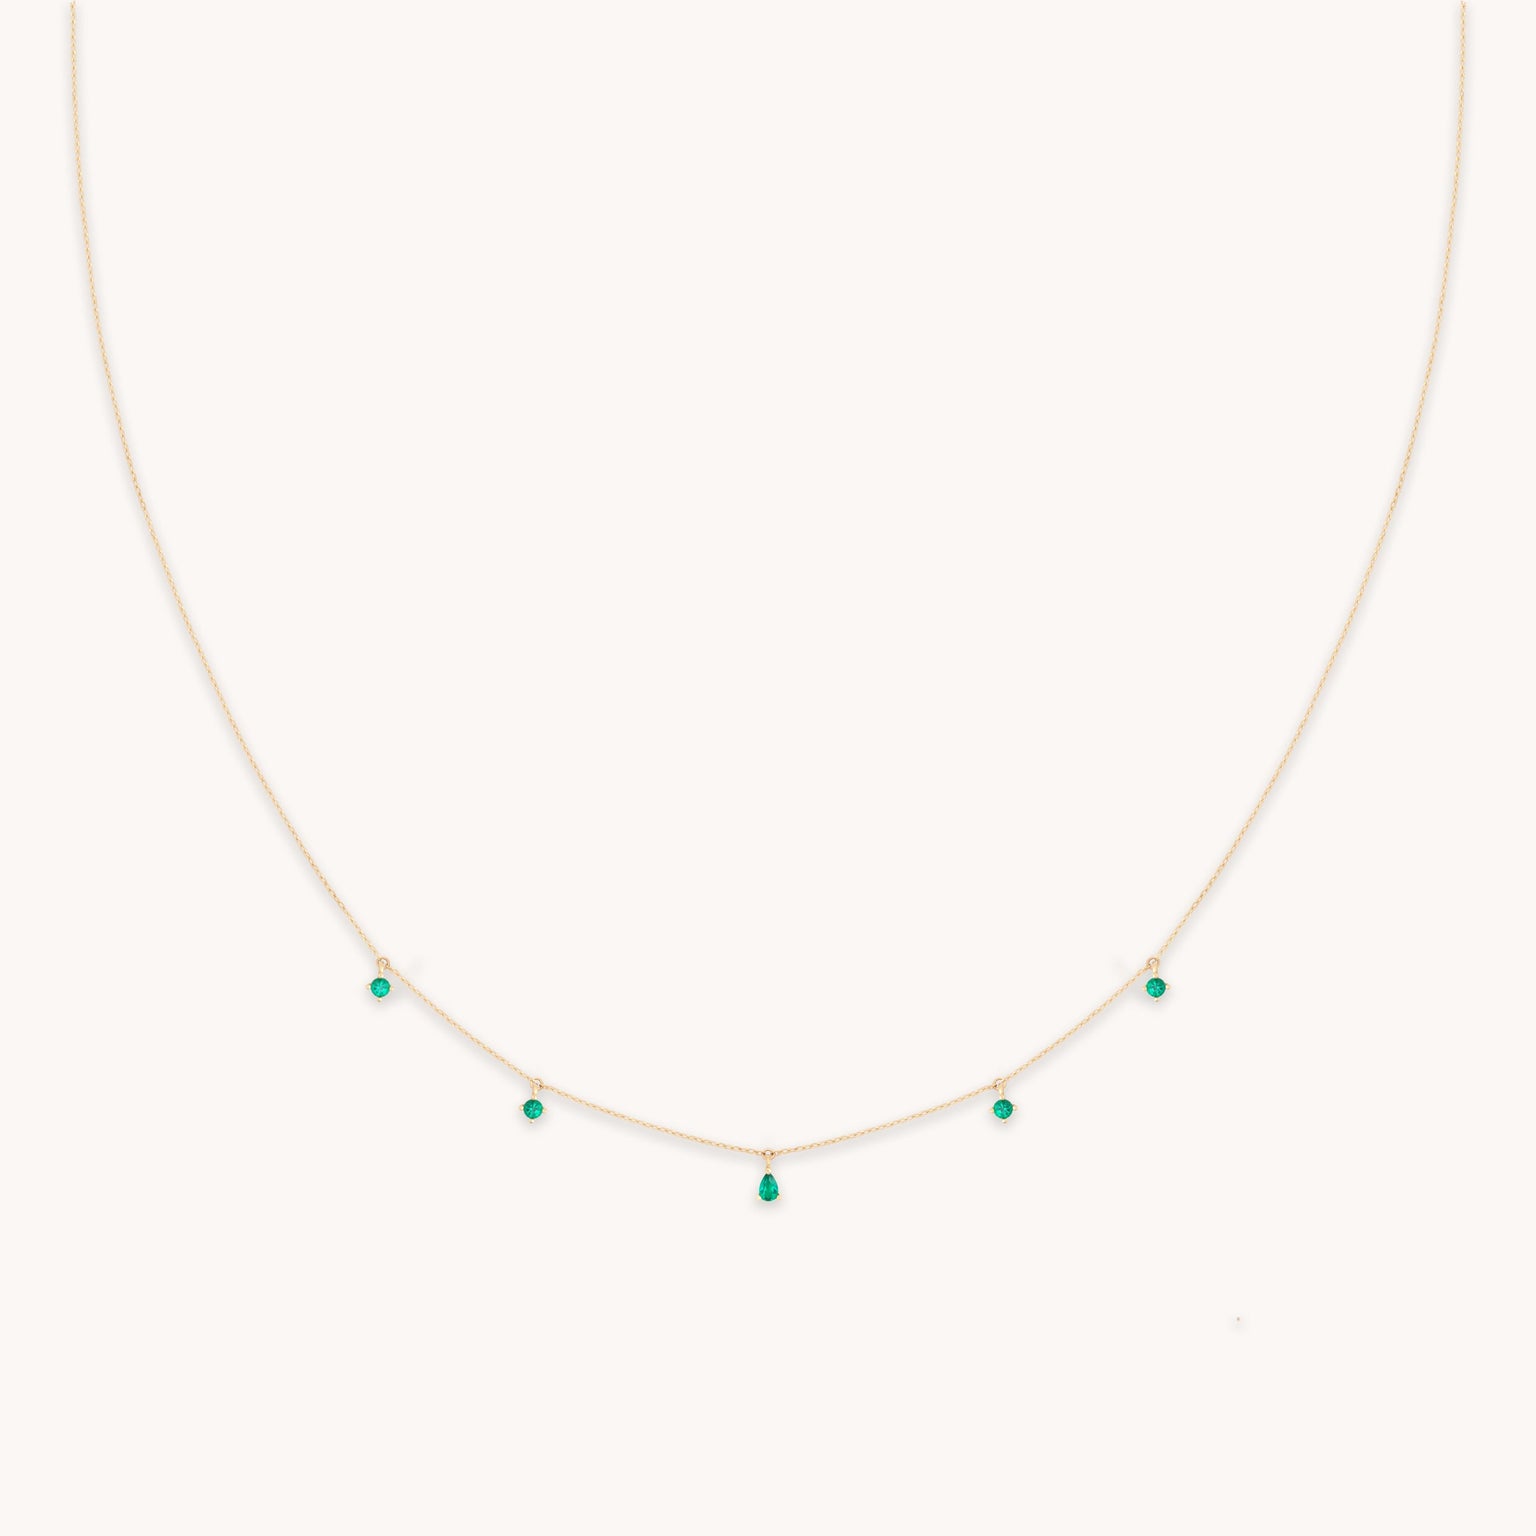 Emerald Charm Necklace in Solid Gold